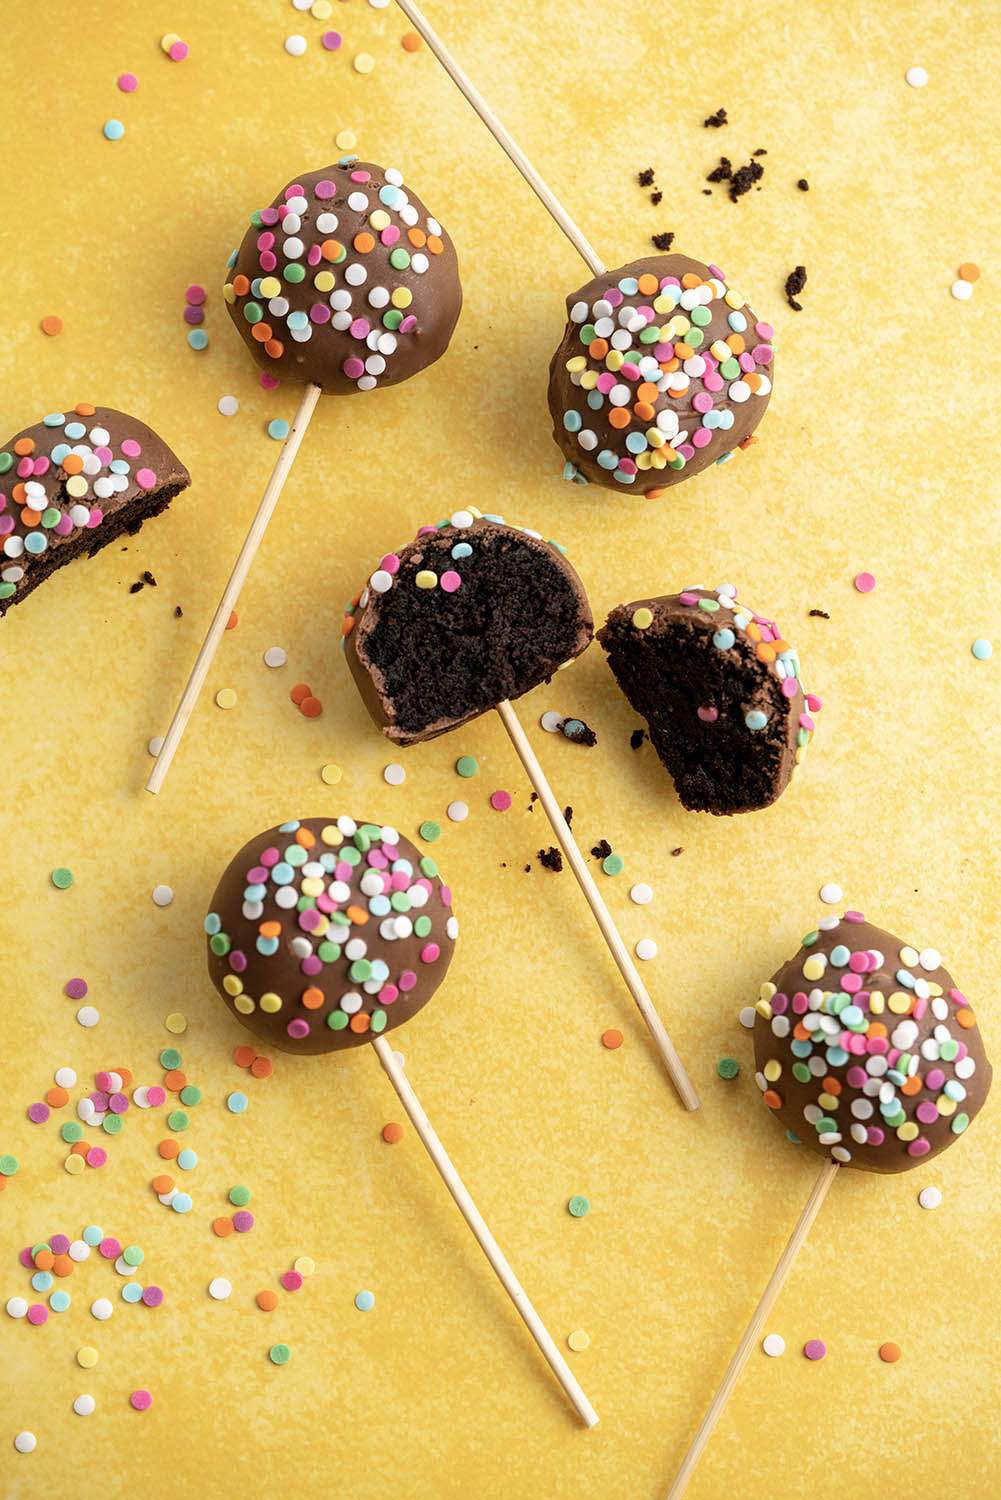 LeftOver Chocolate Cake balls - Bake with Sweetspot